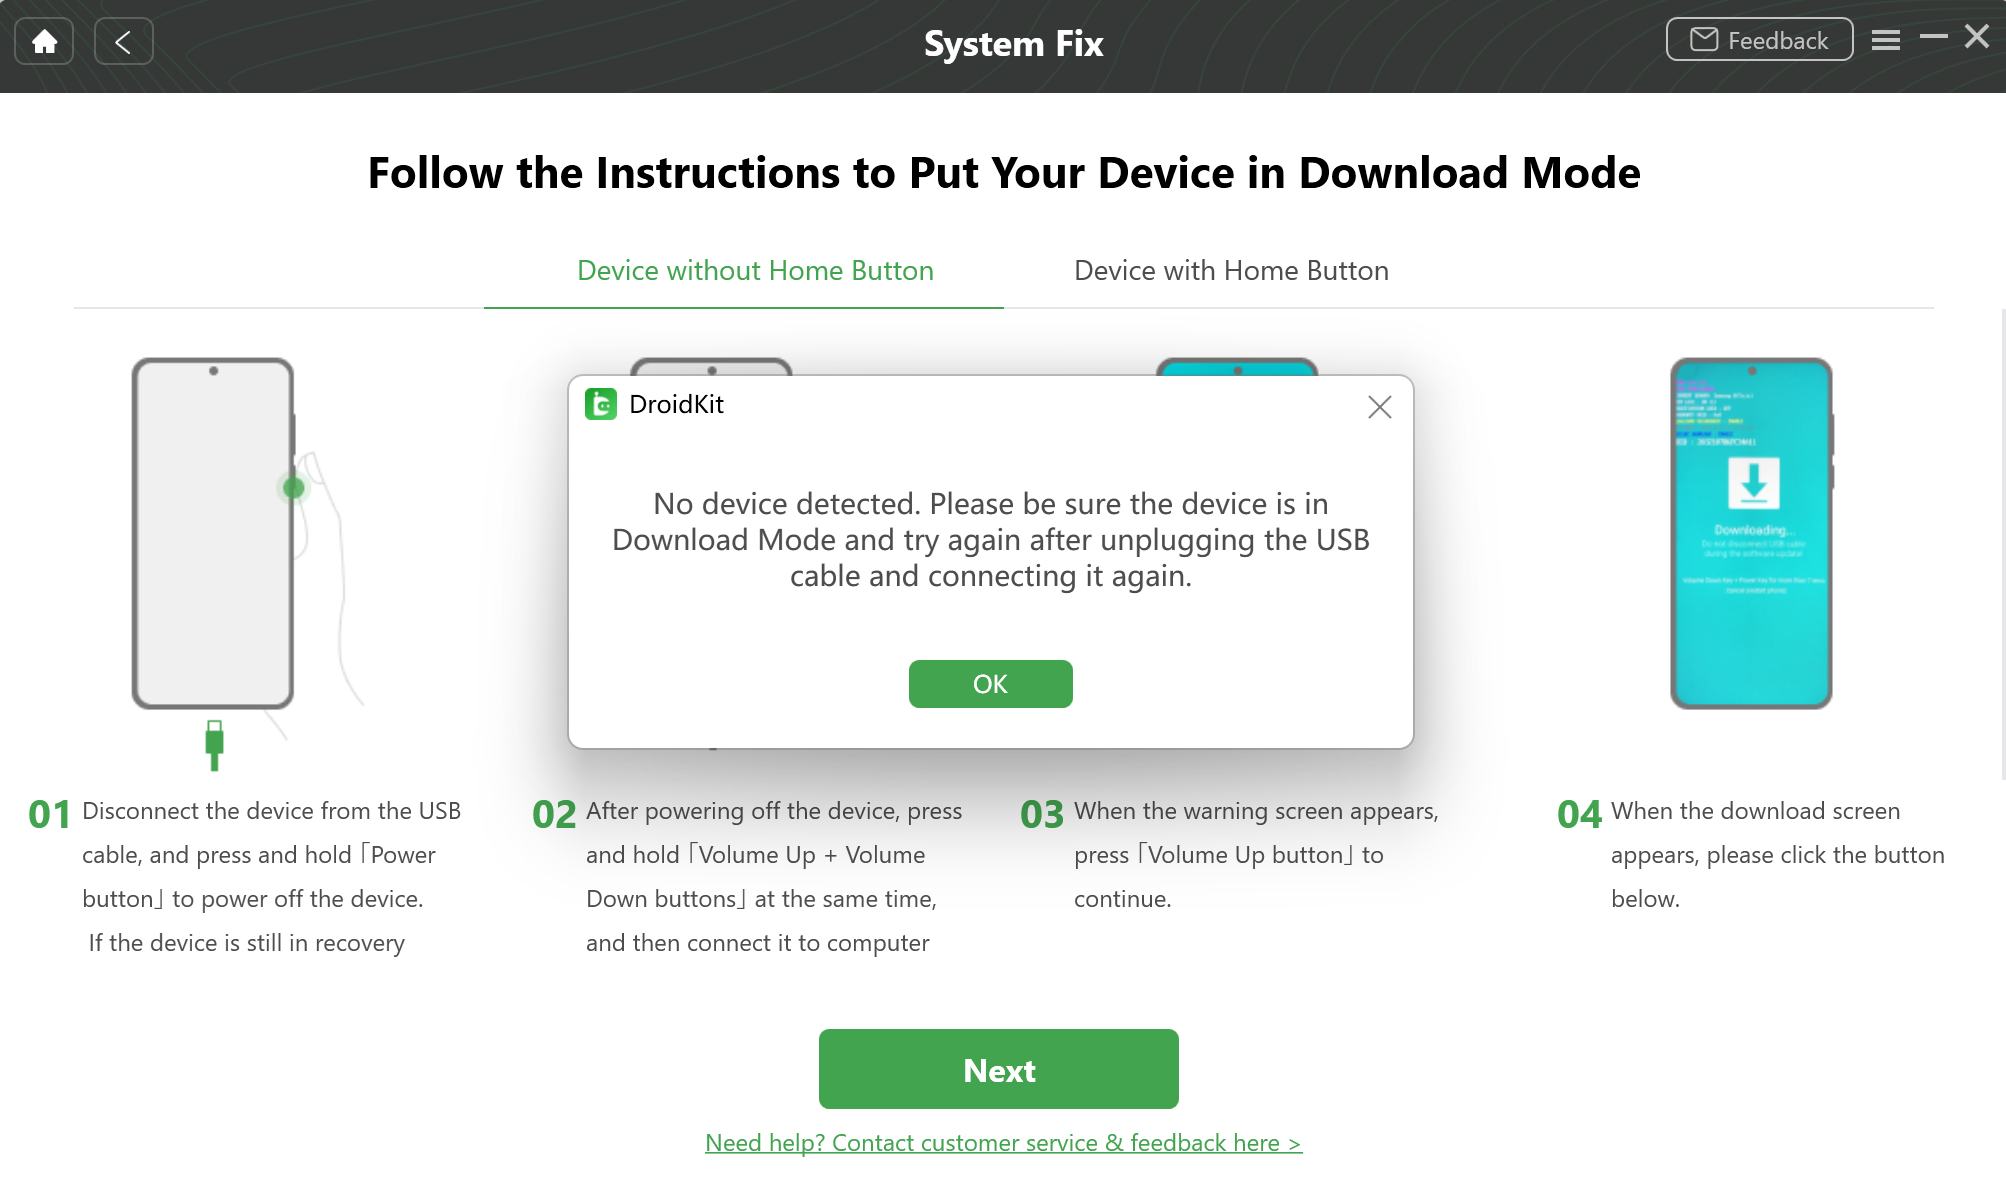 Put Your Device in Download Mode Again